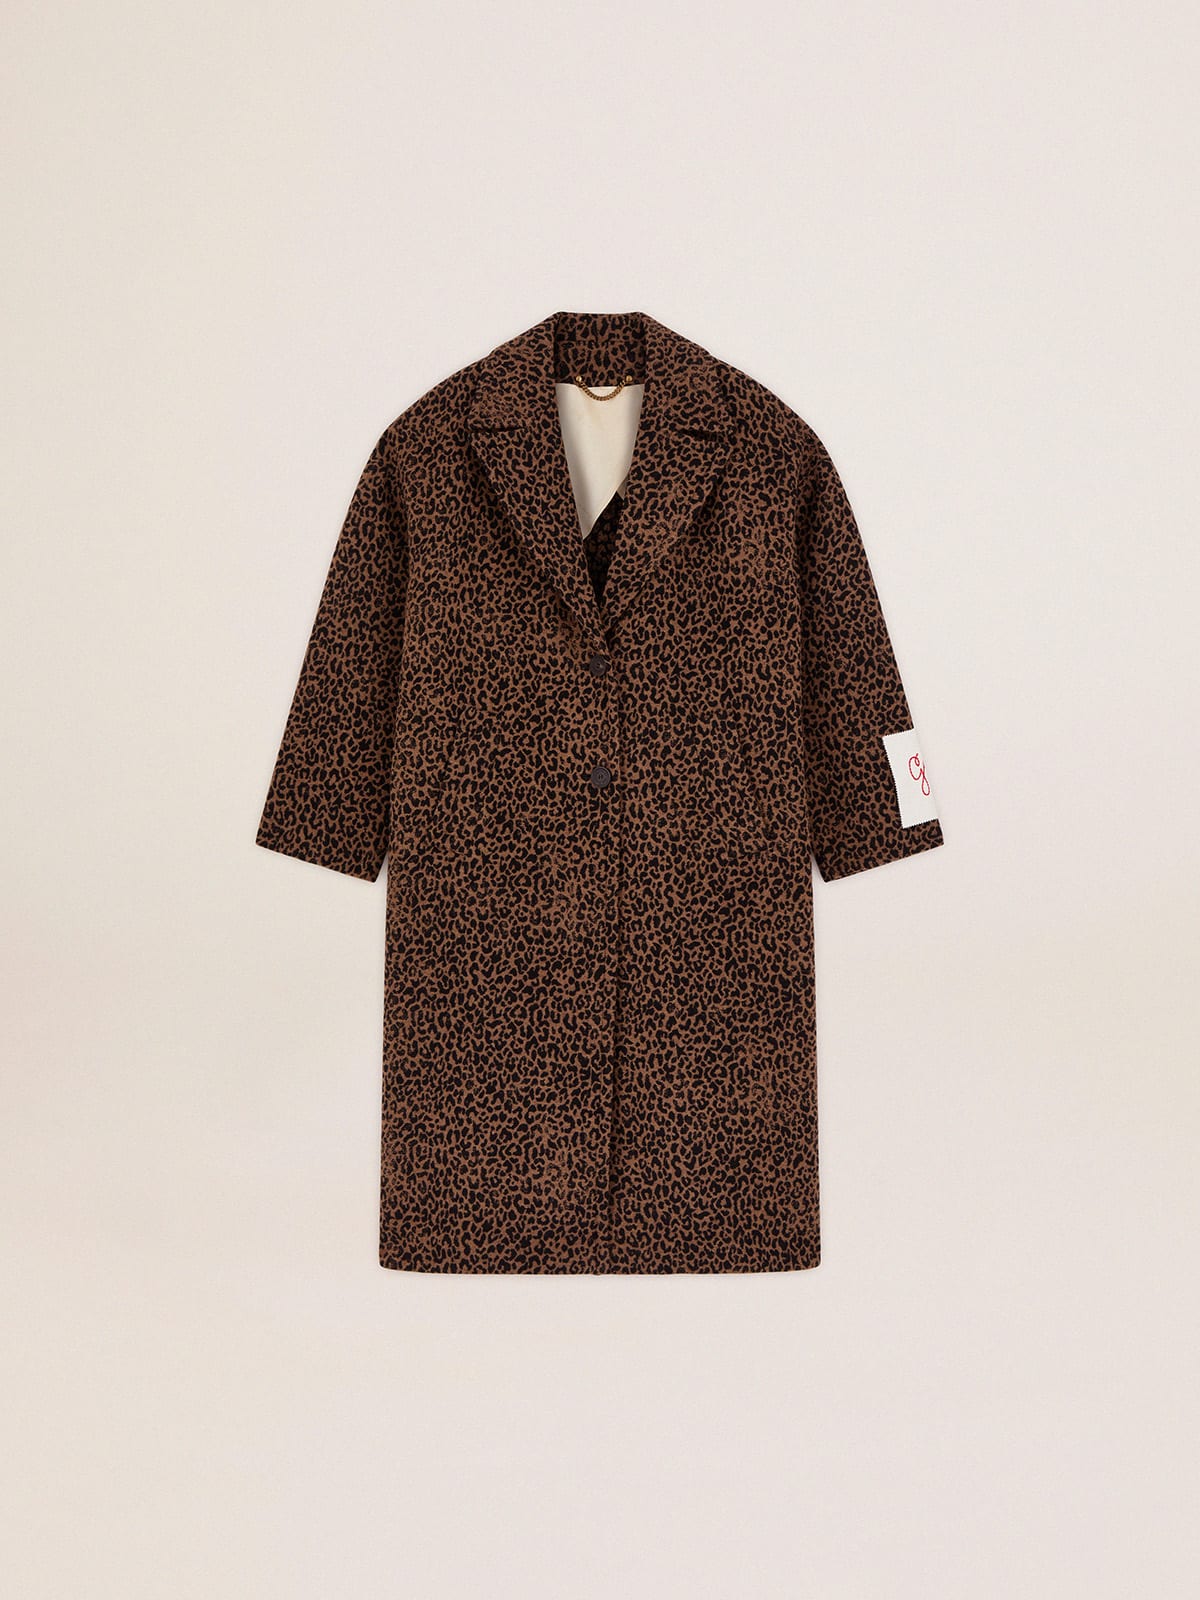 Single-breasted cocoon coat in wool with jacquard animal print